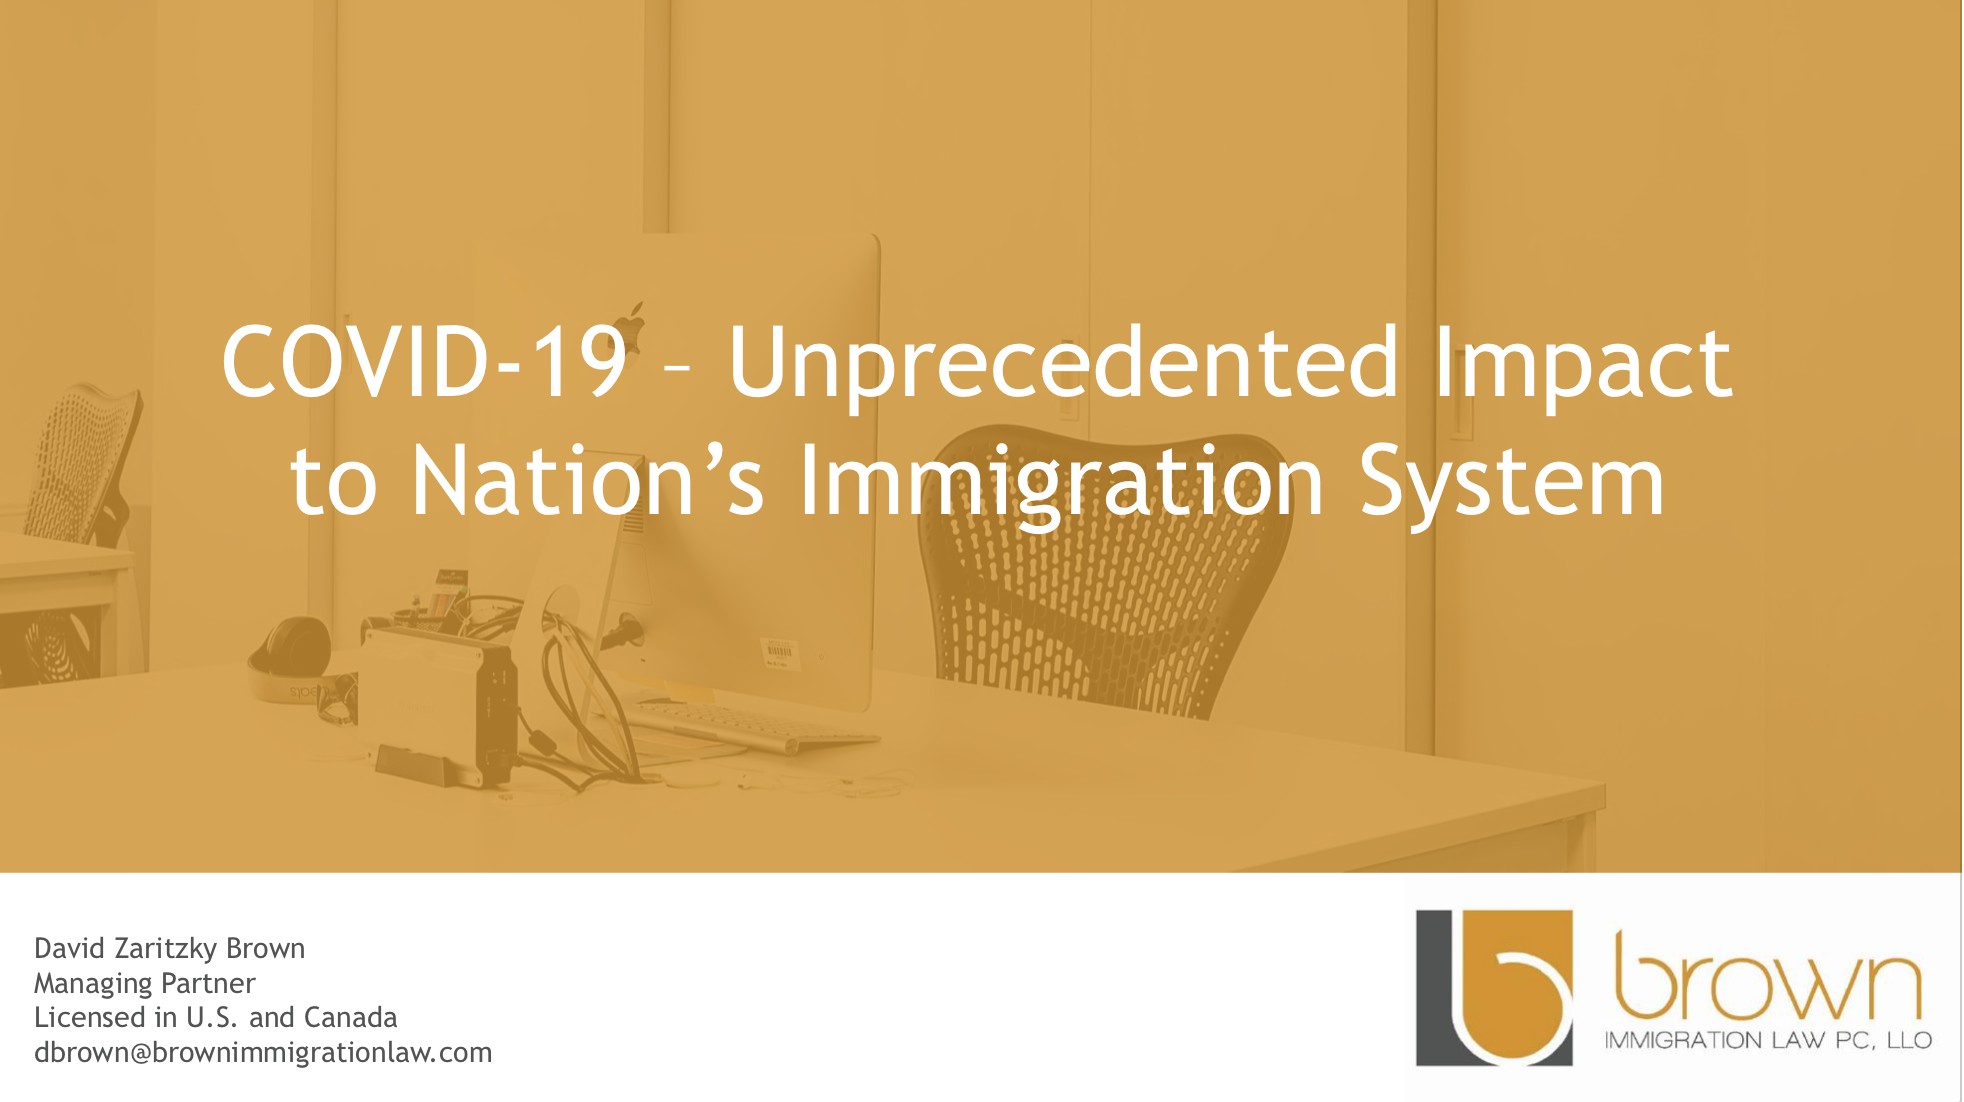 COVID-19 – Unprecedented Impact to Nation’s Immigration System